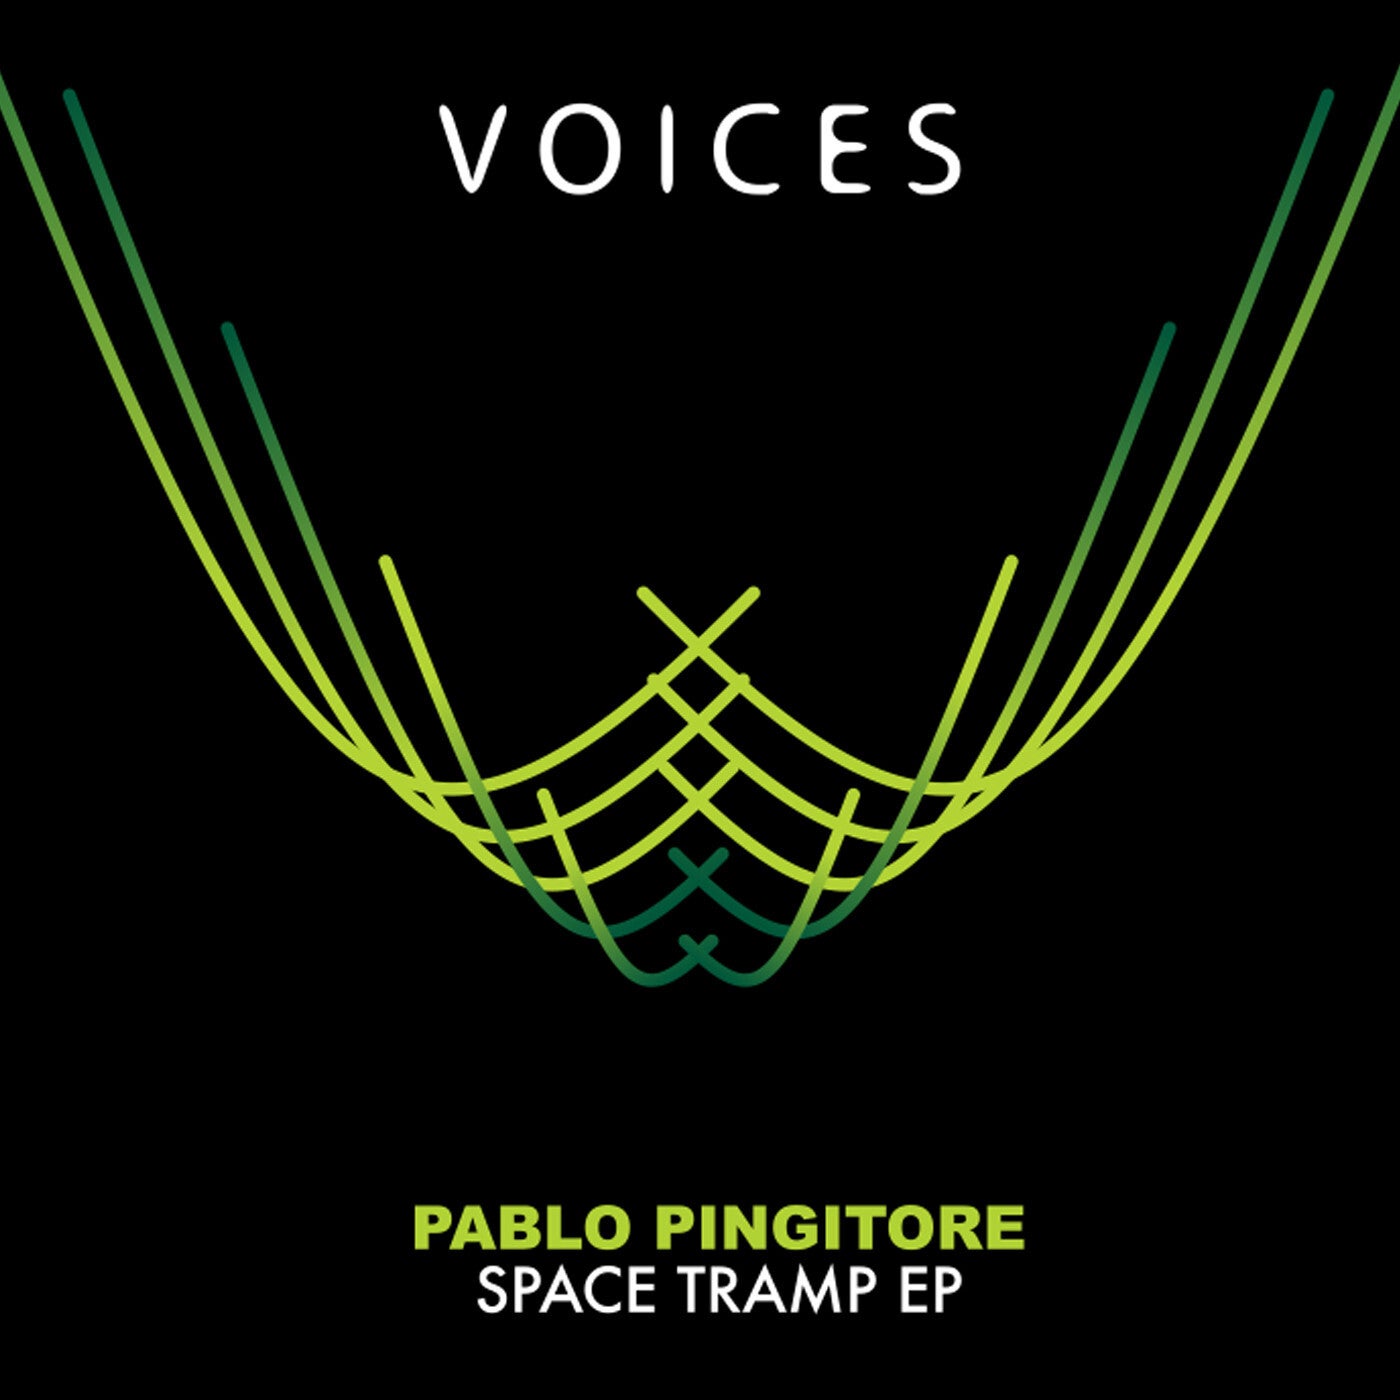 Space Tramp EP